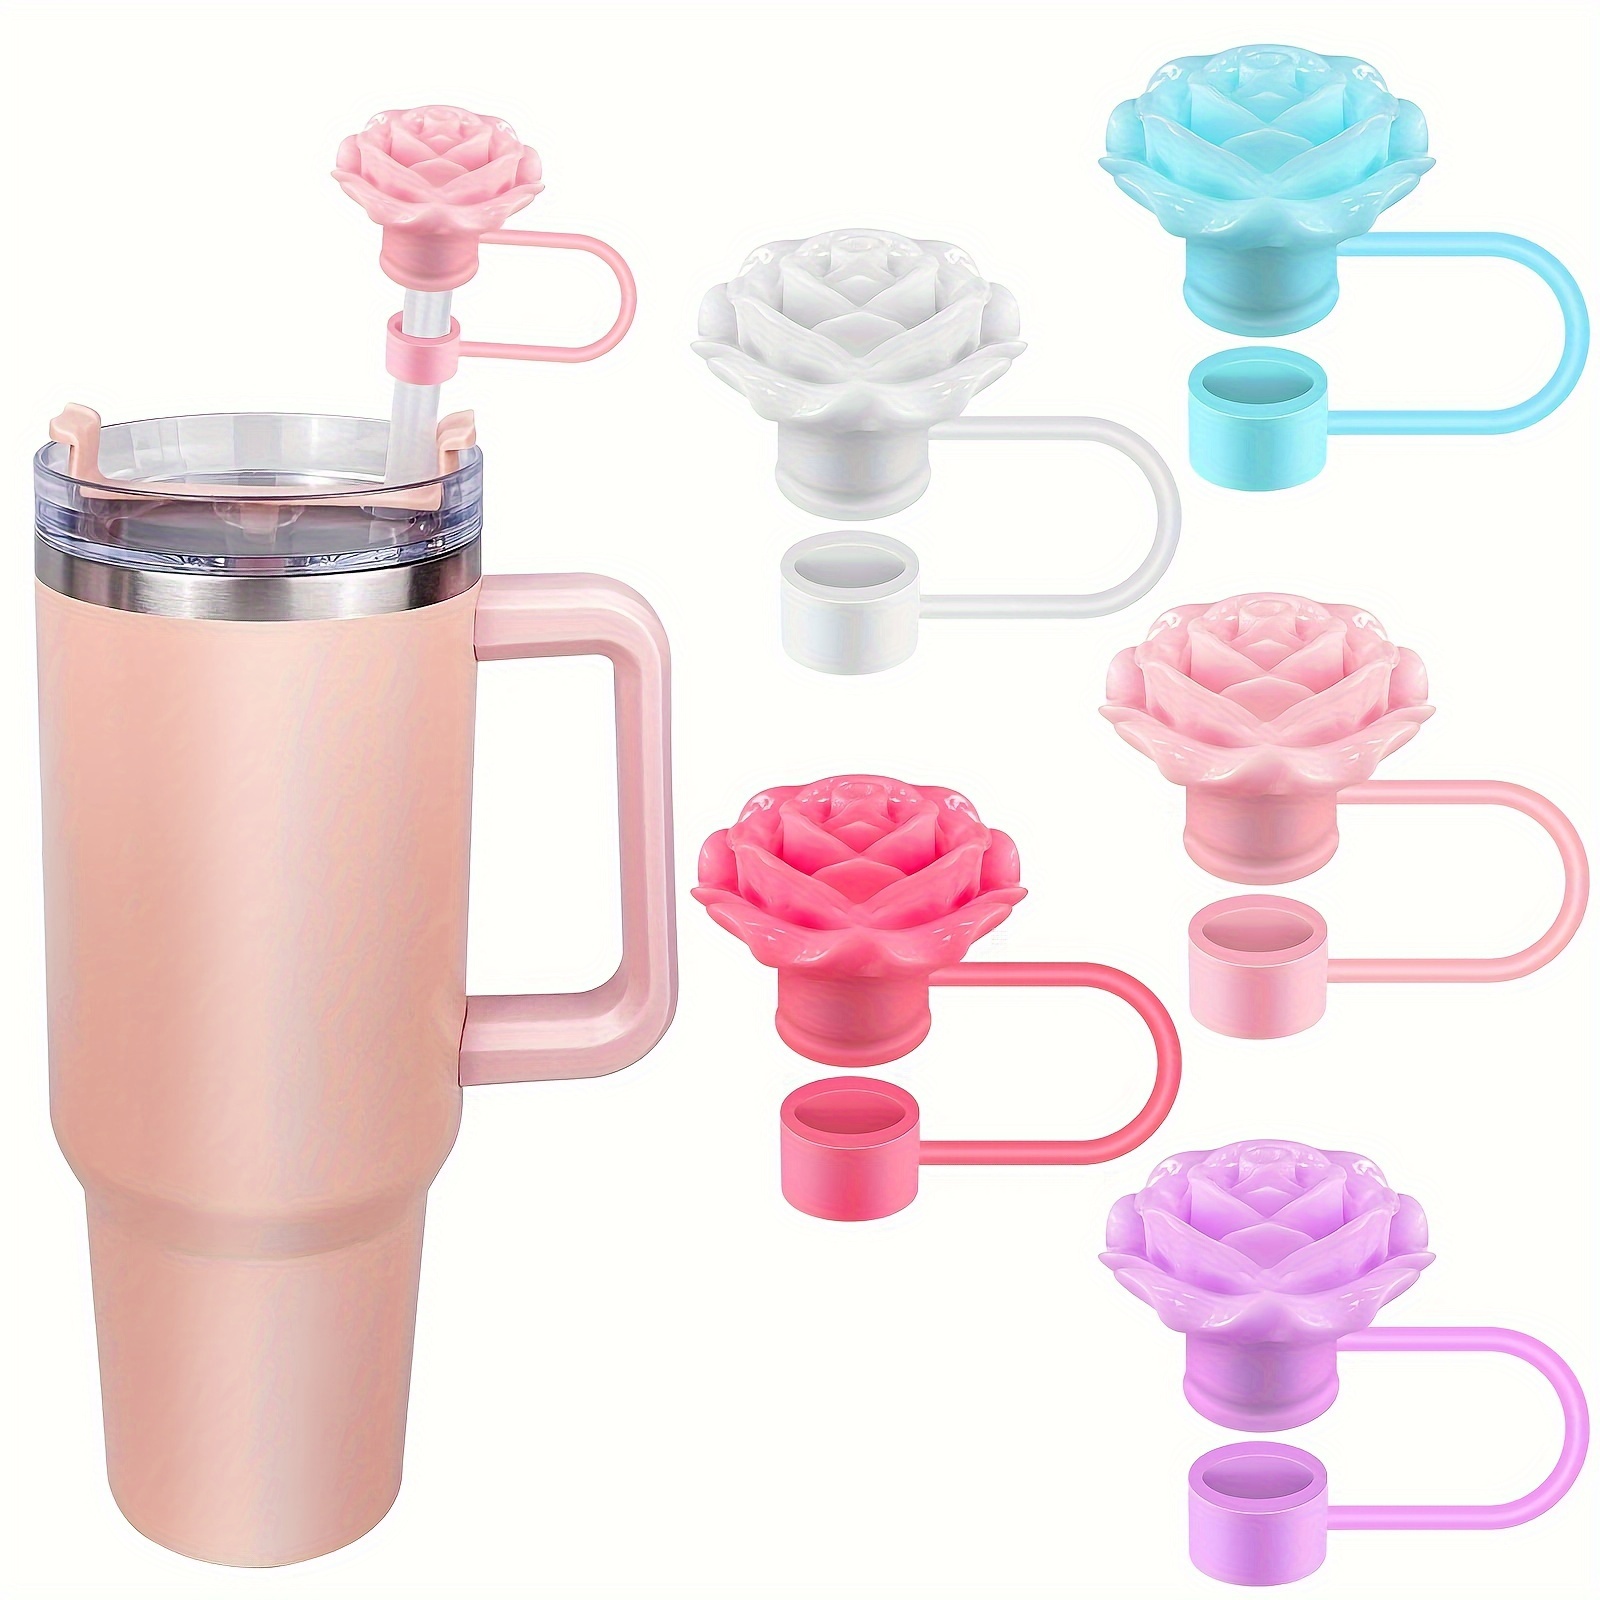 

Silicone Rose Straw Caps For Stanley Cup - 5 Pcs, Reusable & Bpa-free Silicone Straw Covers, Fits 0.4 Inch Straws, Dishwasher Safe, Perfect For Parties & Daily Use